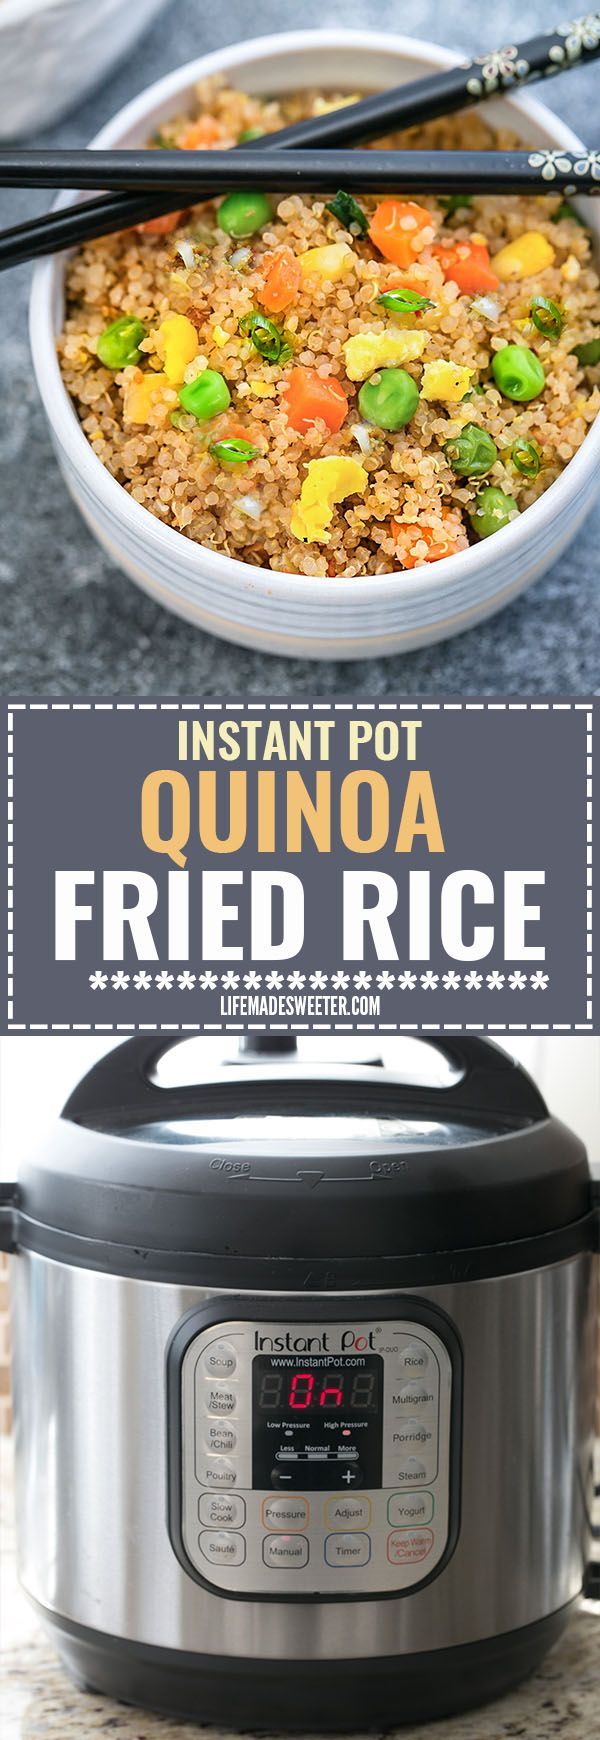 Instant Pot Quinoa Fried Rice makes a simple and healthy alternative to traditional fried rice. Full of protein and vegetables and just perfect for busy weeknights. Best of all, instructions included to make it in your Instant Pot pressure cooker or on the stove! -   19 best quinoa recipes
 ideas